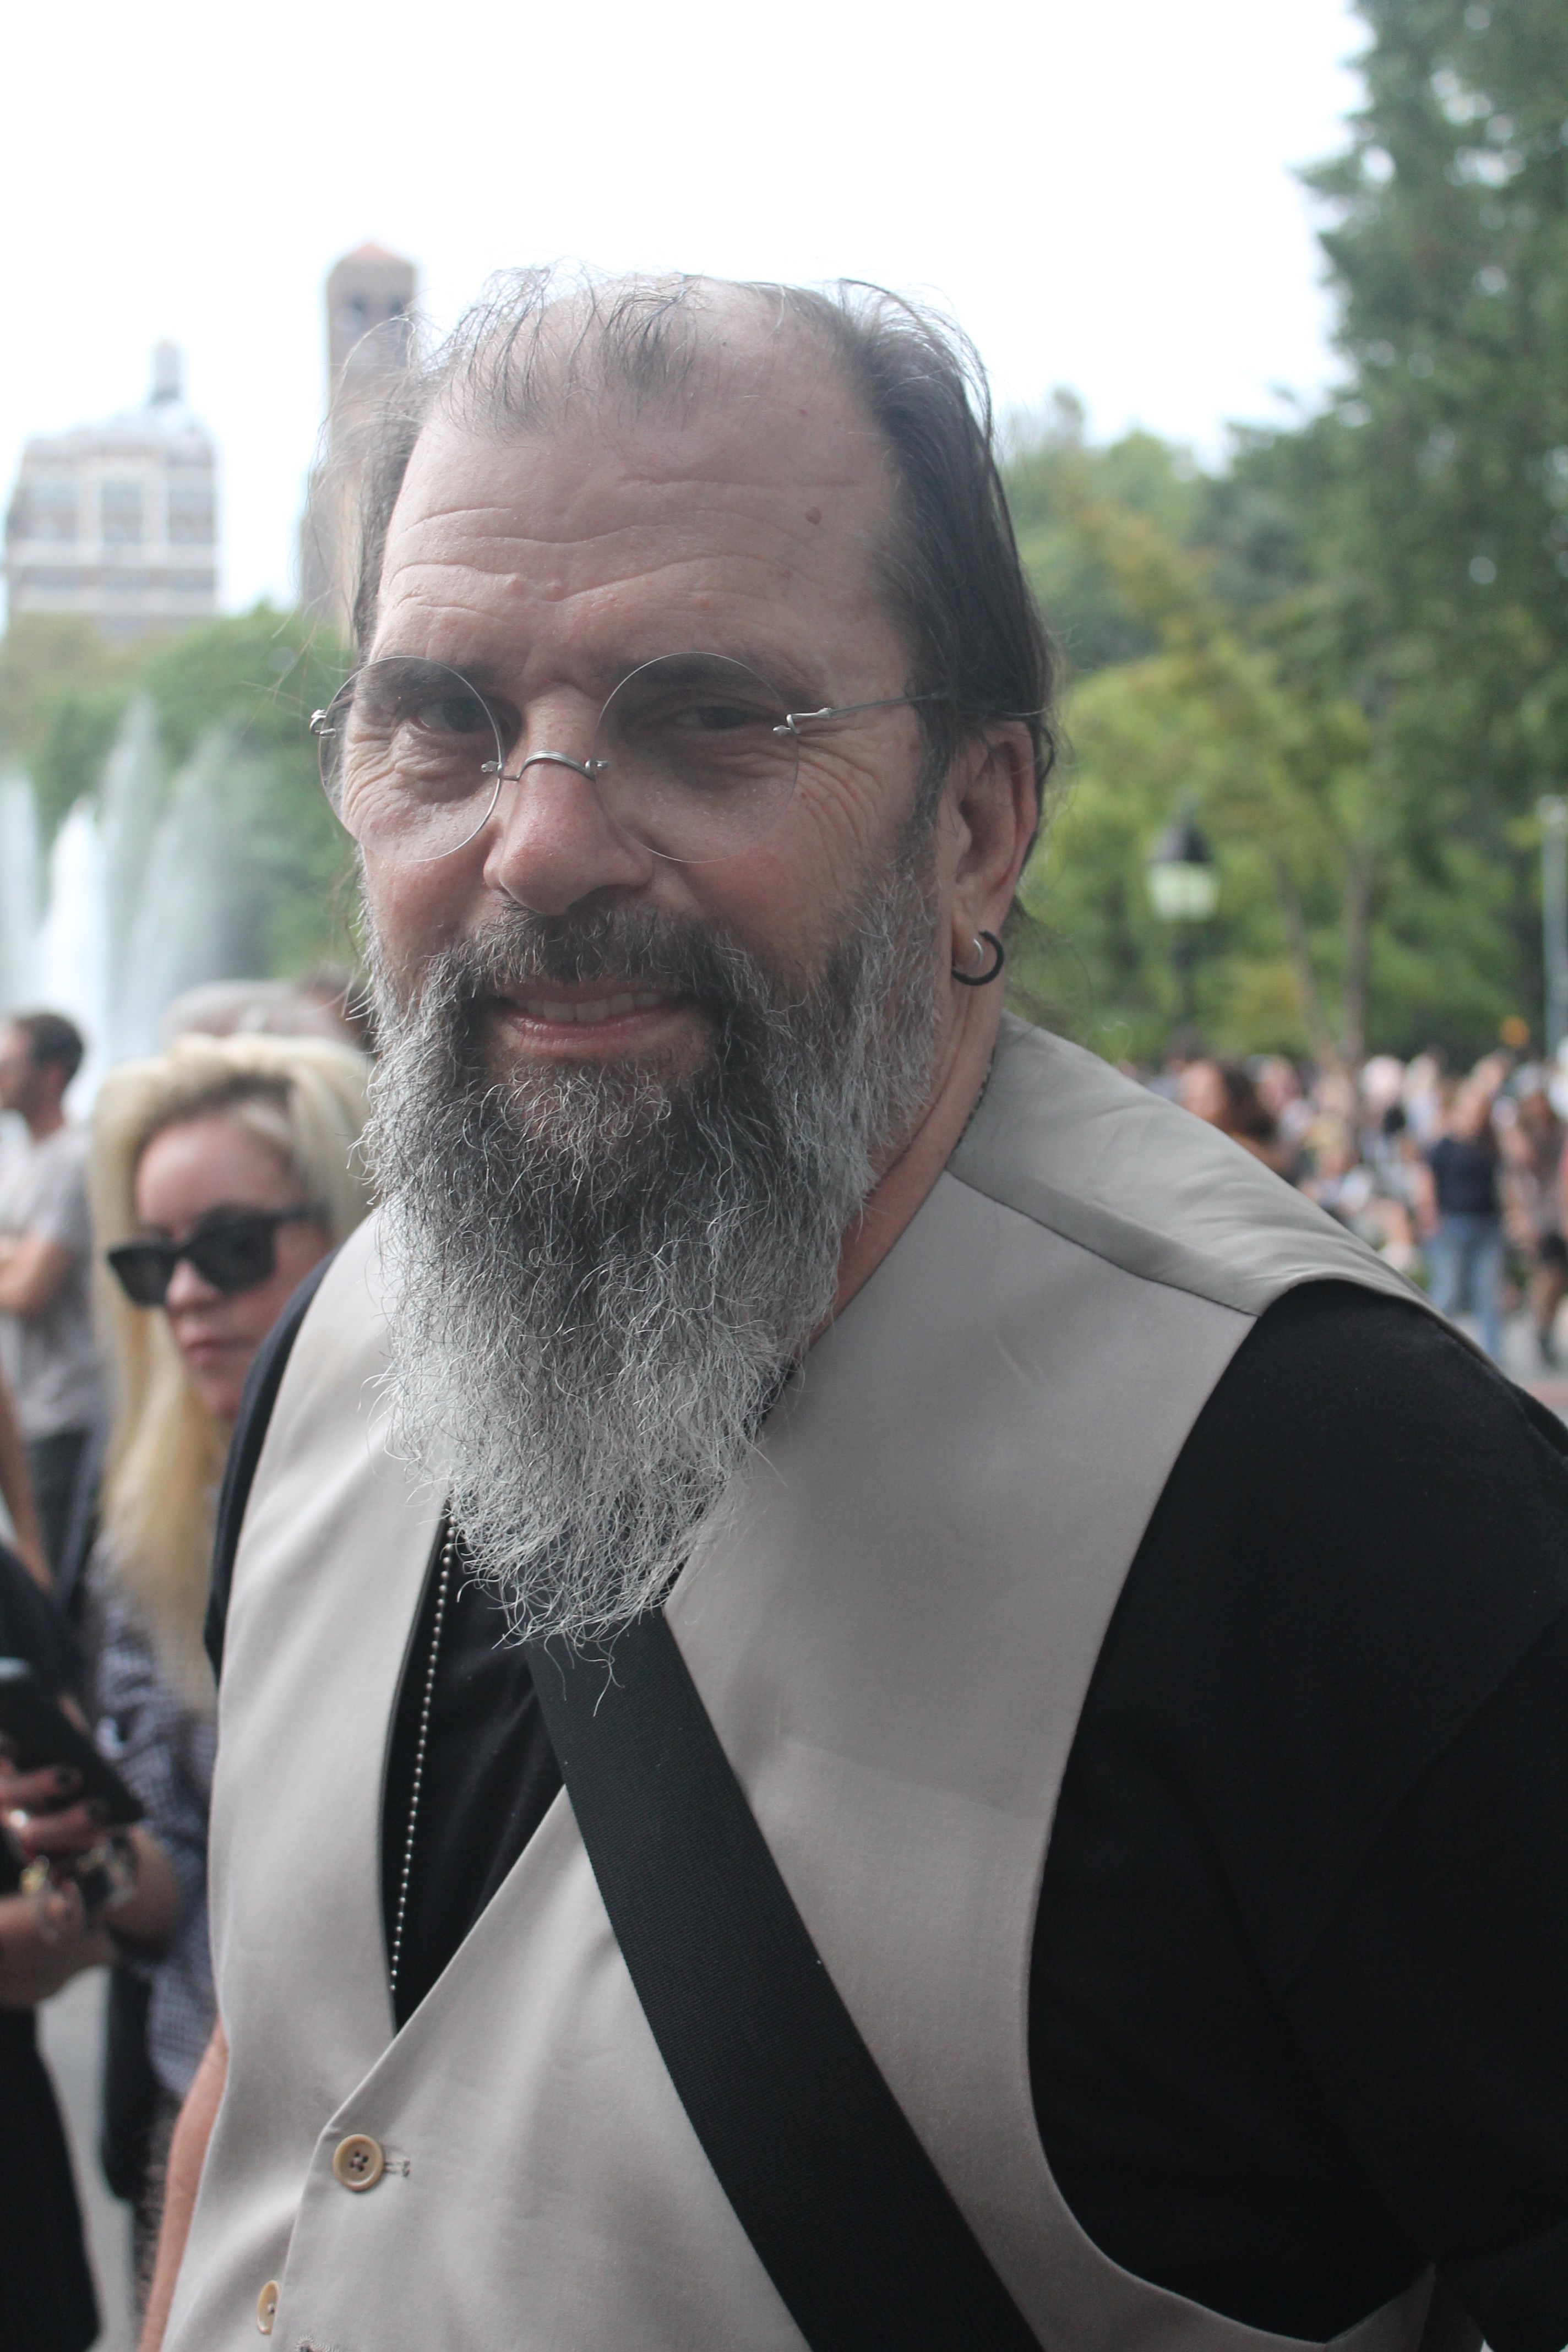 Steve Earle headlined The Village Trip's free concert in the park. (Photo by The Village Sun)